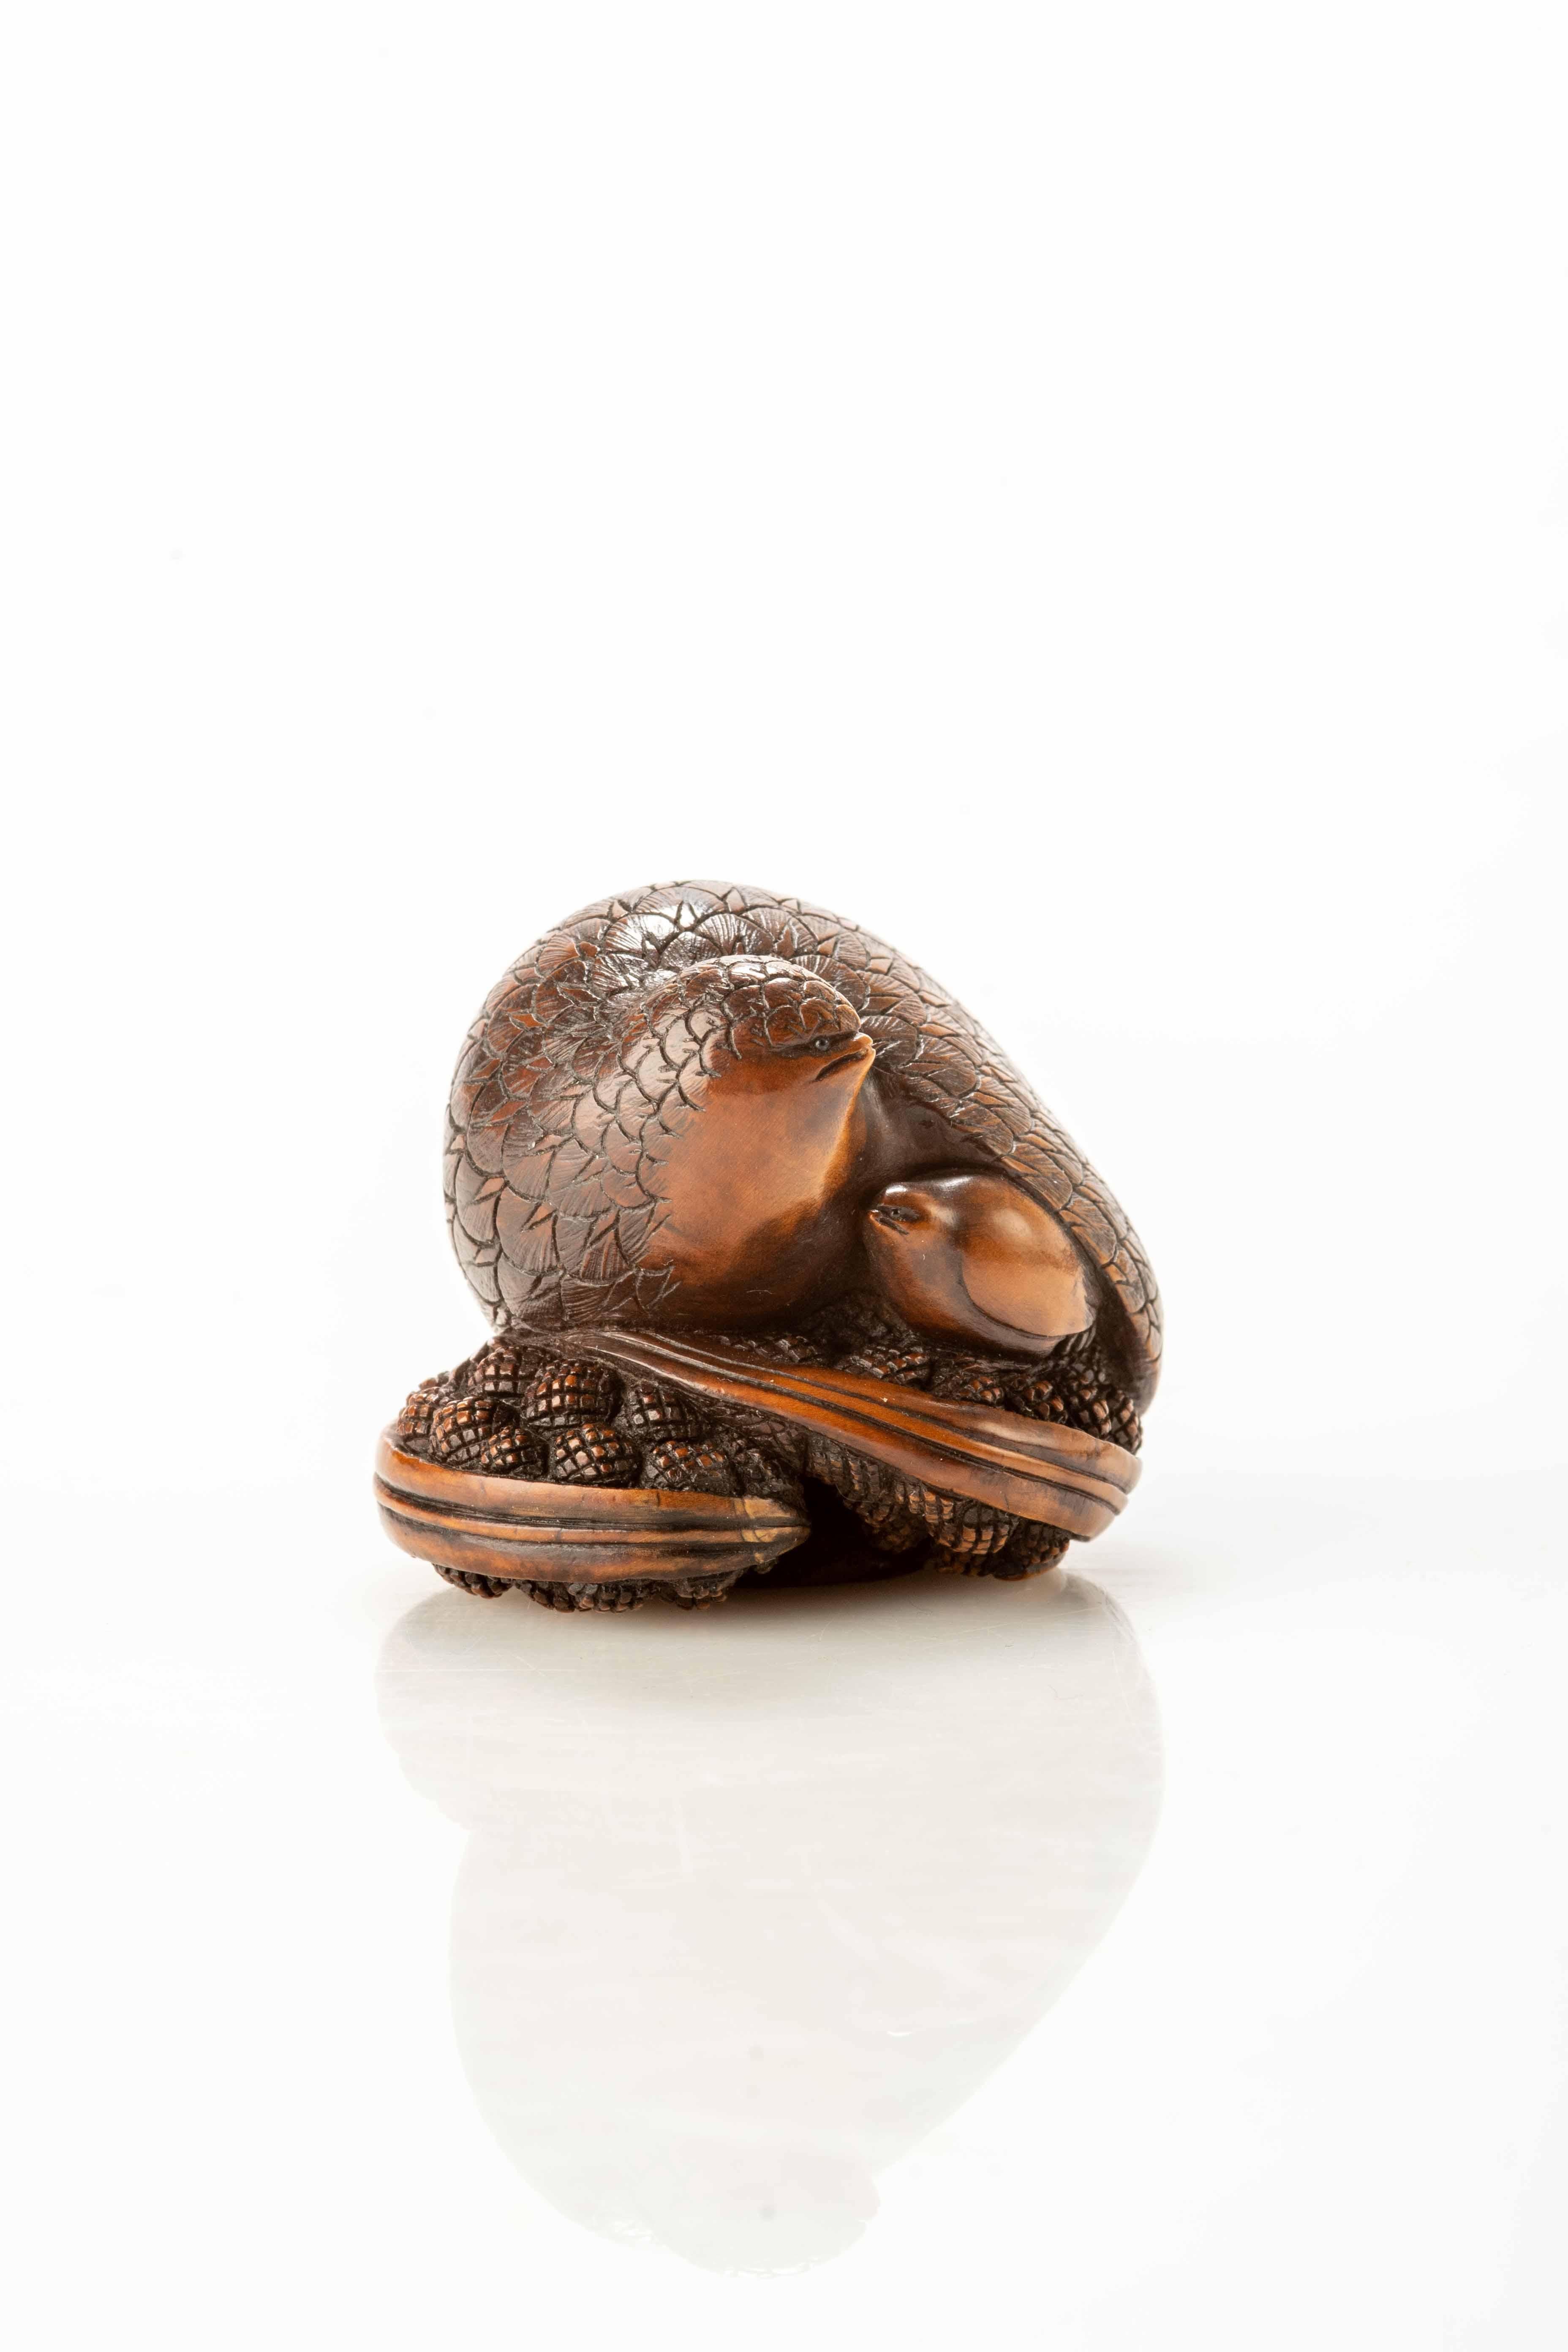 A boxwood netsuke depicting a pair of quails crouching on millet, with horned eyes. The mother lovingly protects her baby, creating an image of family affection in nature.

Signed under the base within an oval reserve.

Origin: Japan

Period: Edo